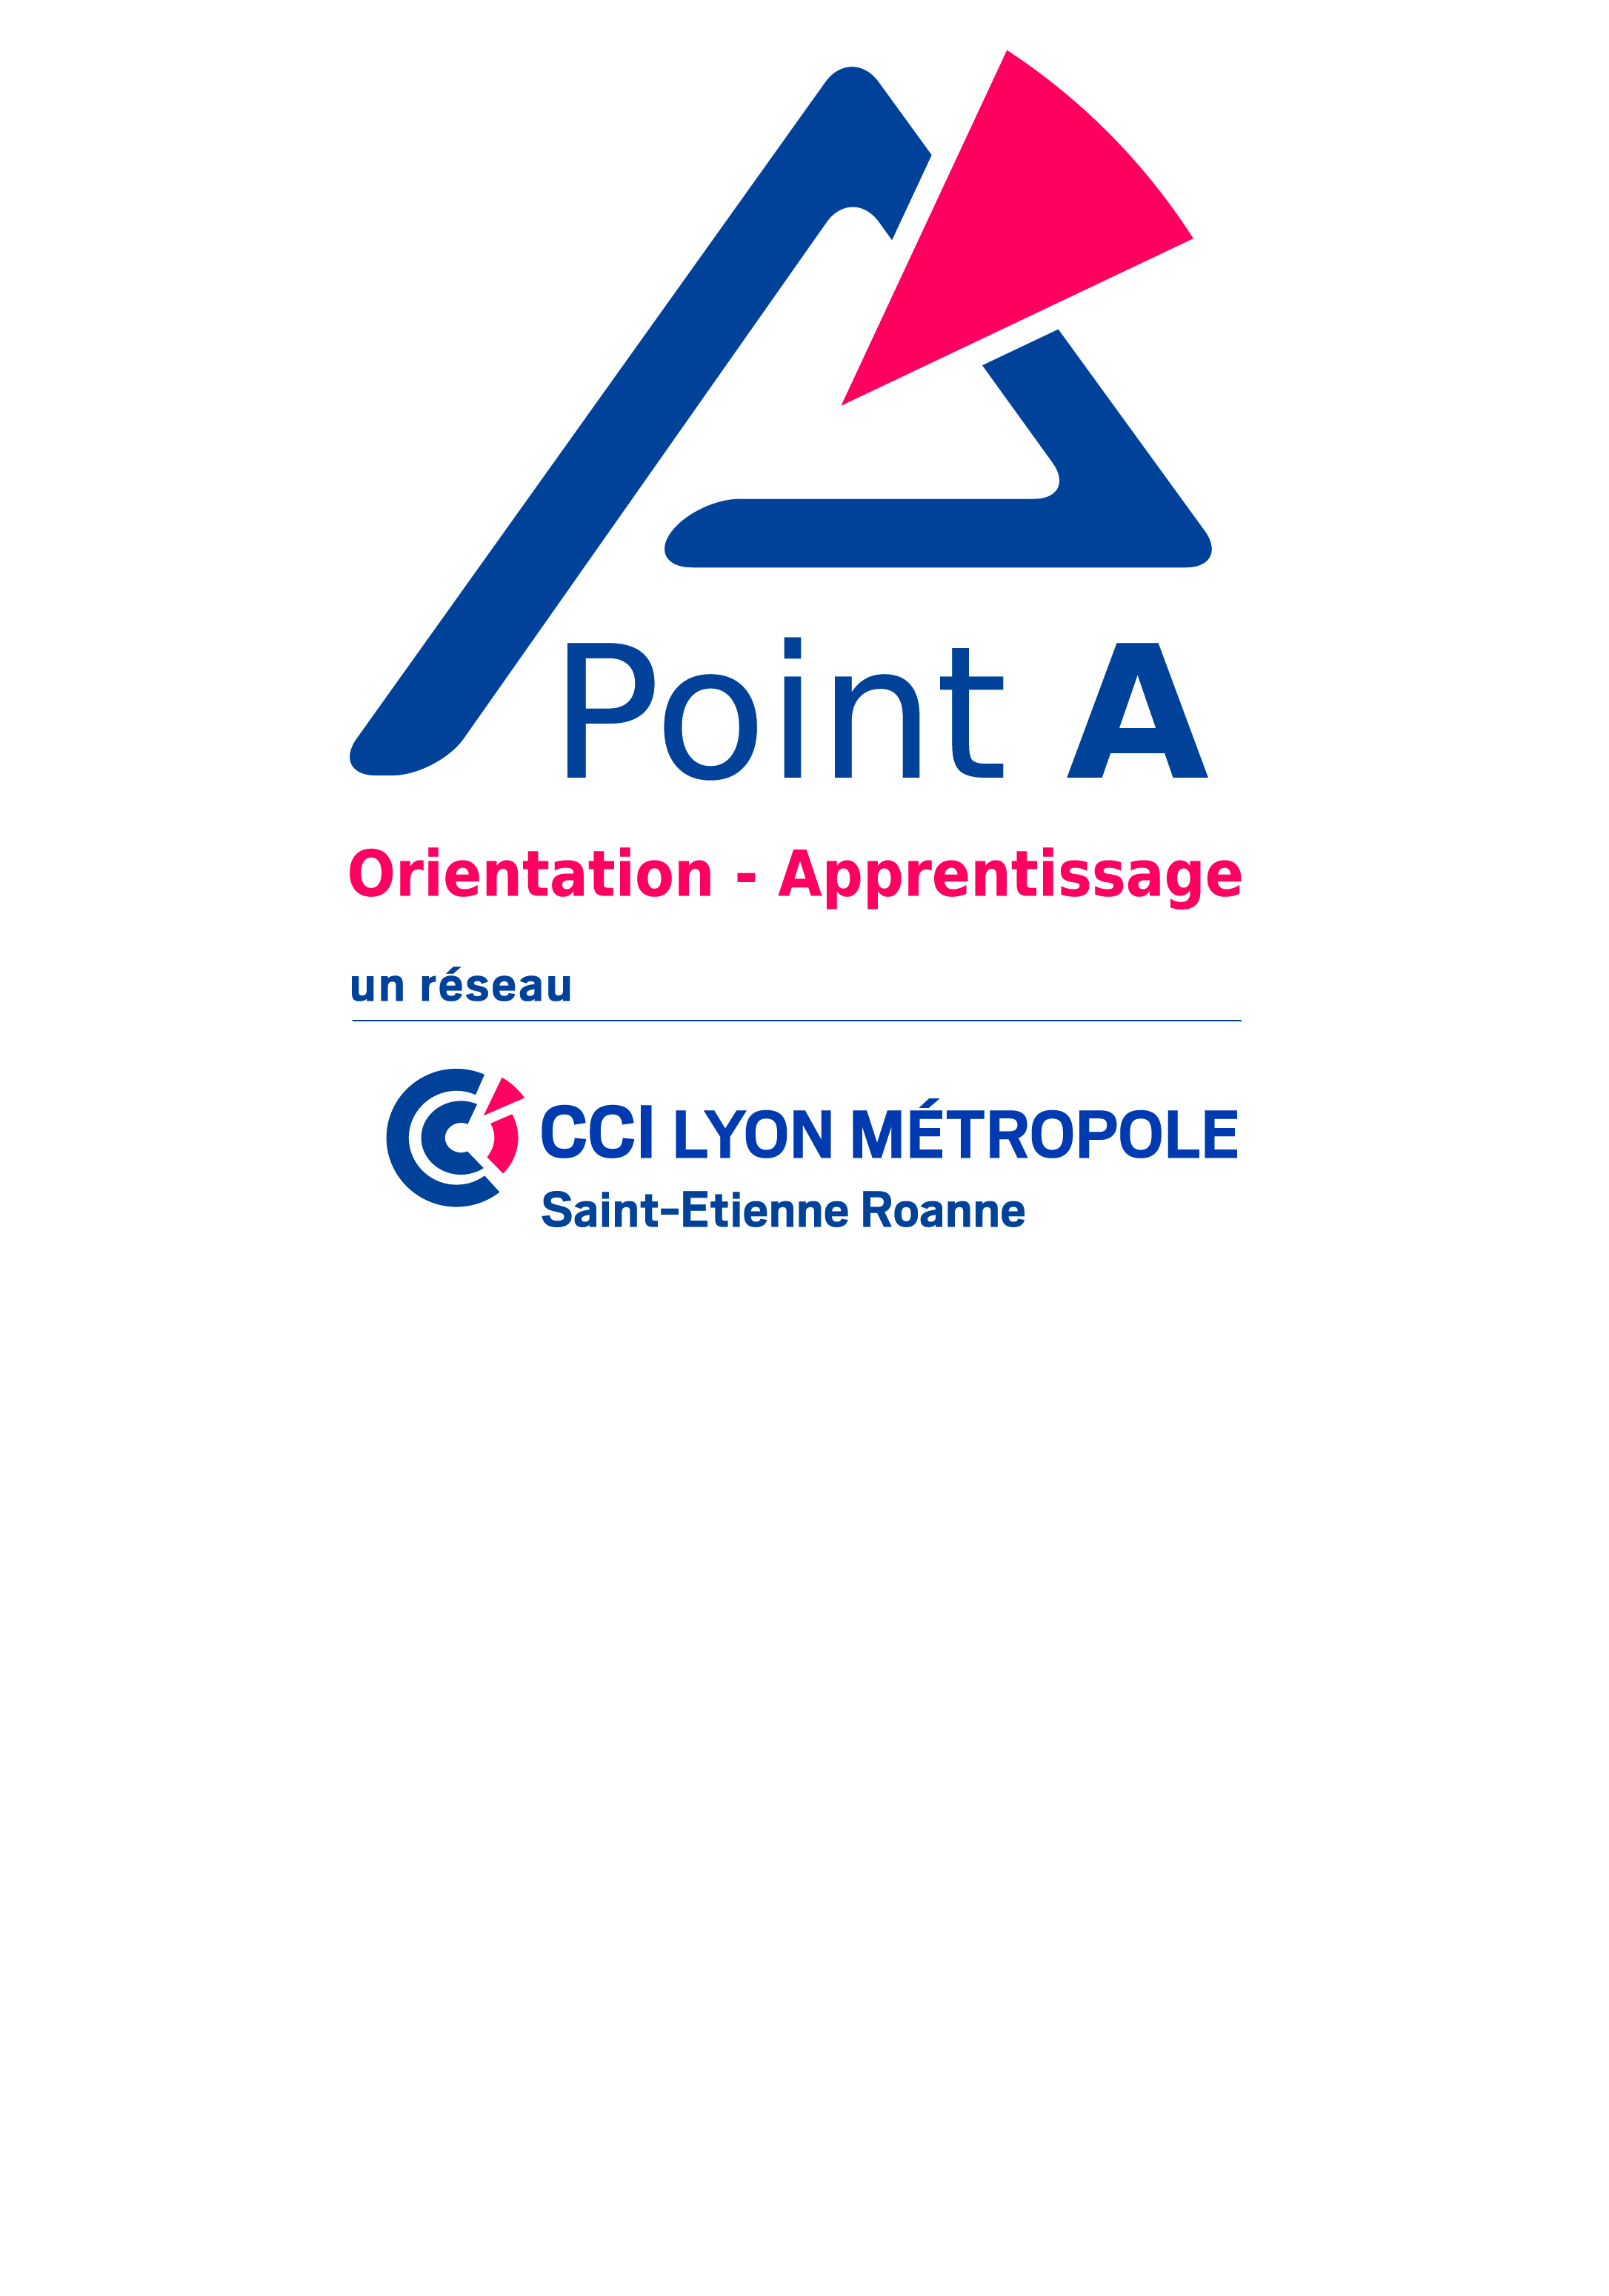 \\intranet.lyon.cci.fr\davwwwroot\espace-metiers\d1\p6\privatedocs\communication\logos\logo mini stage point a\point a.jpg